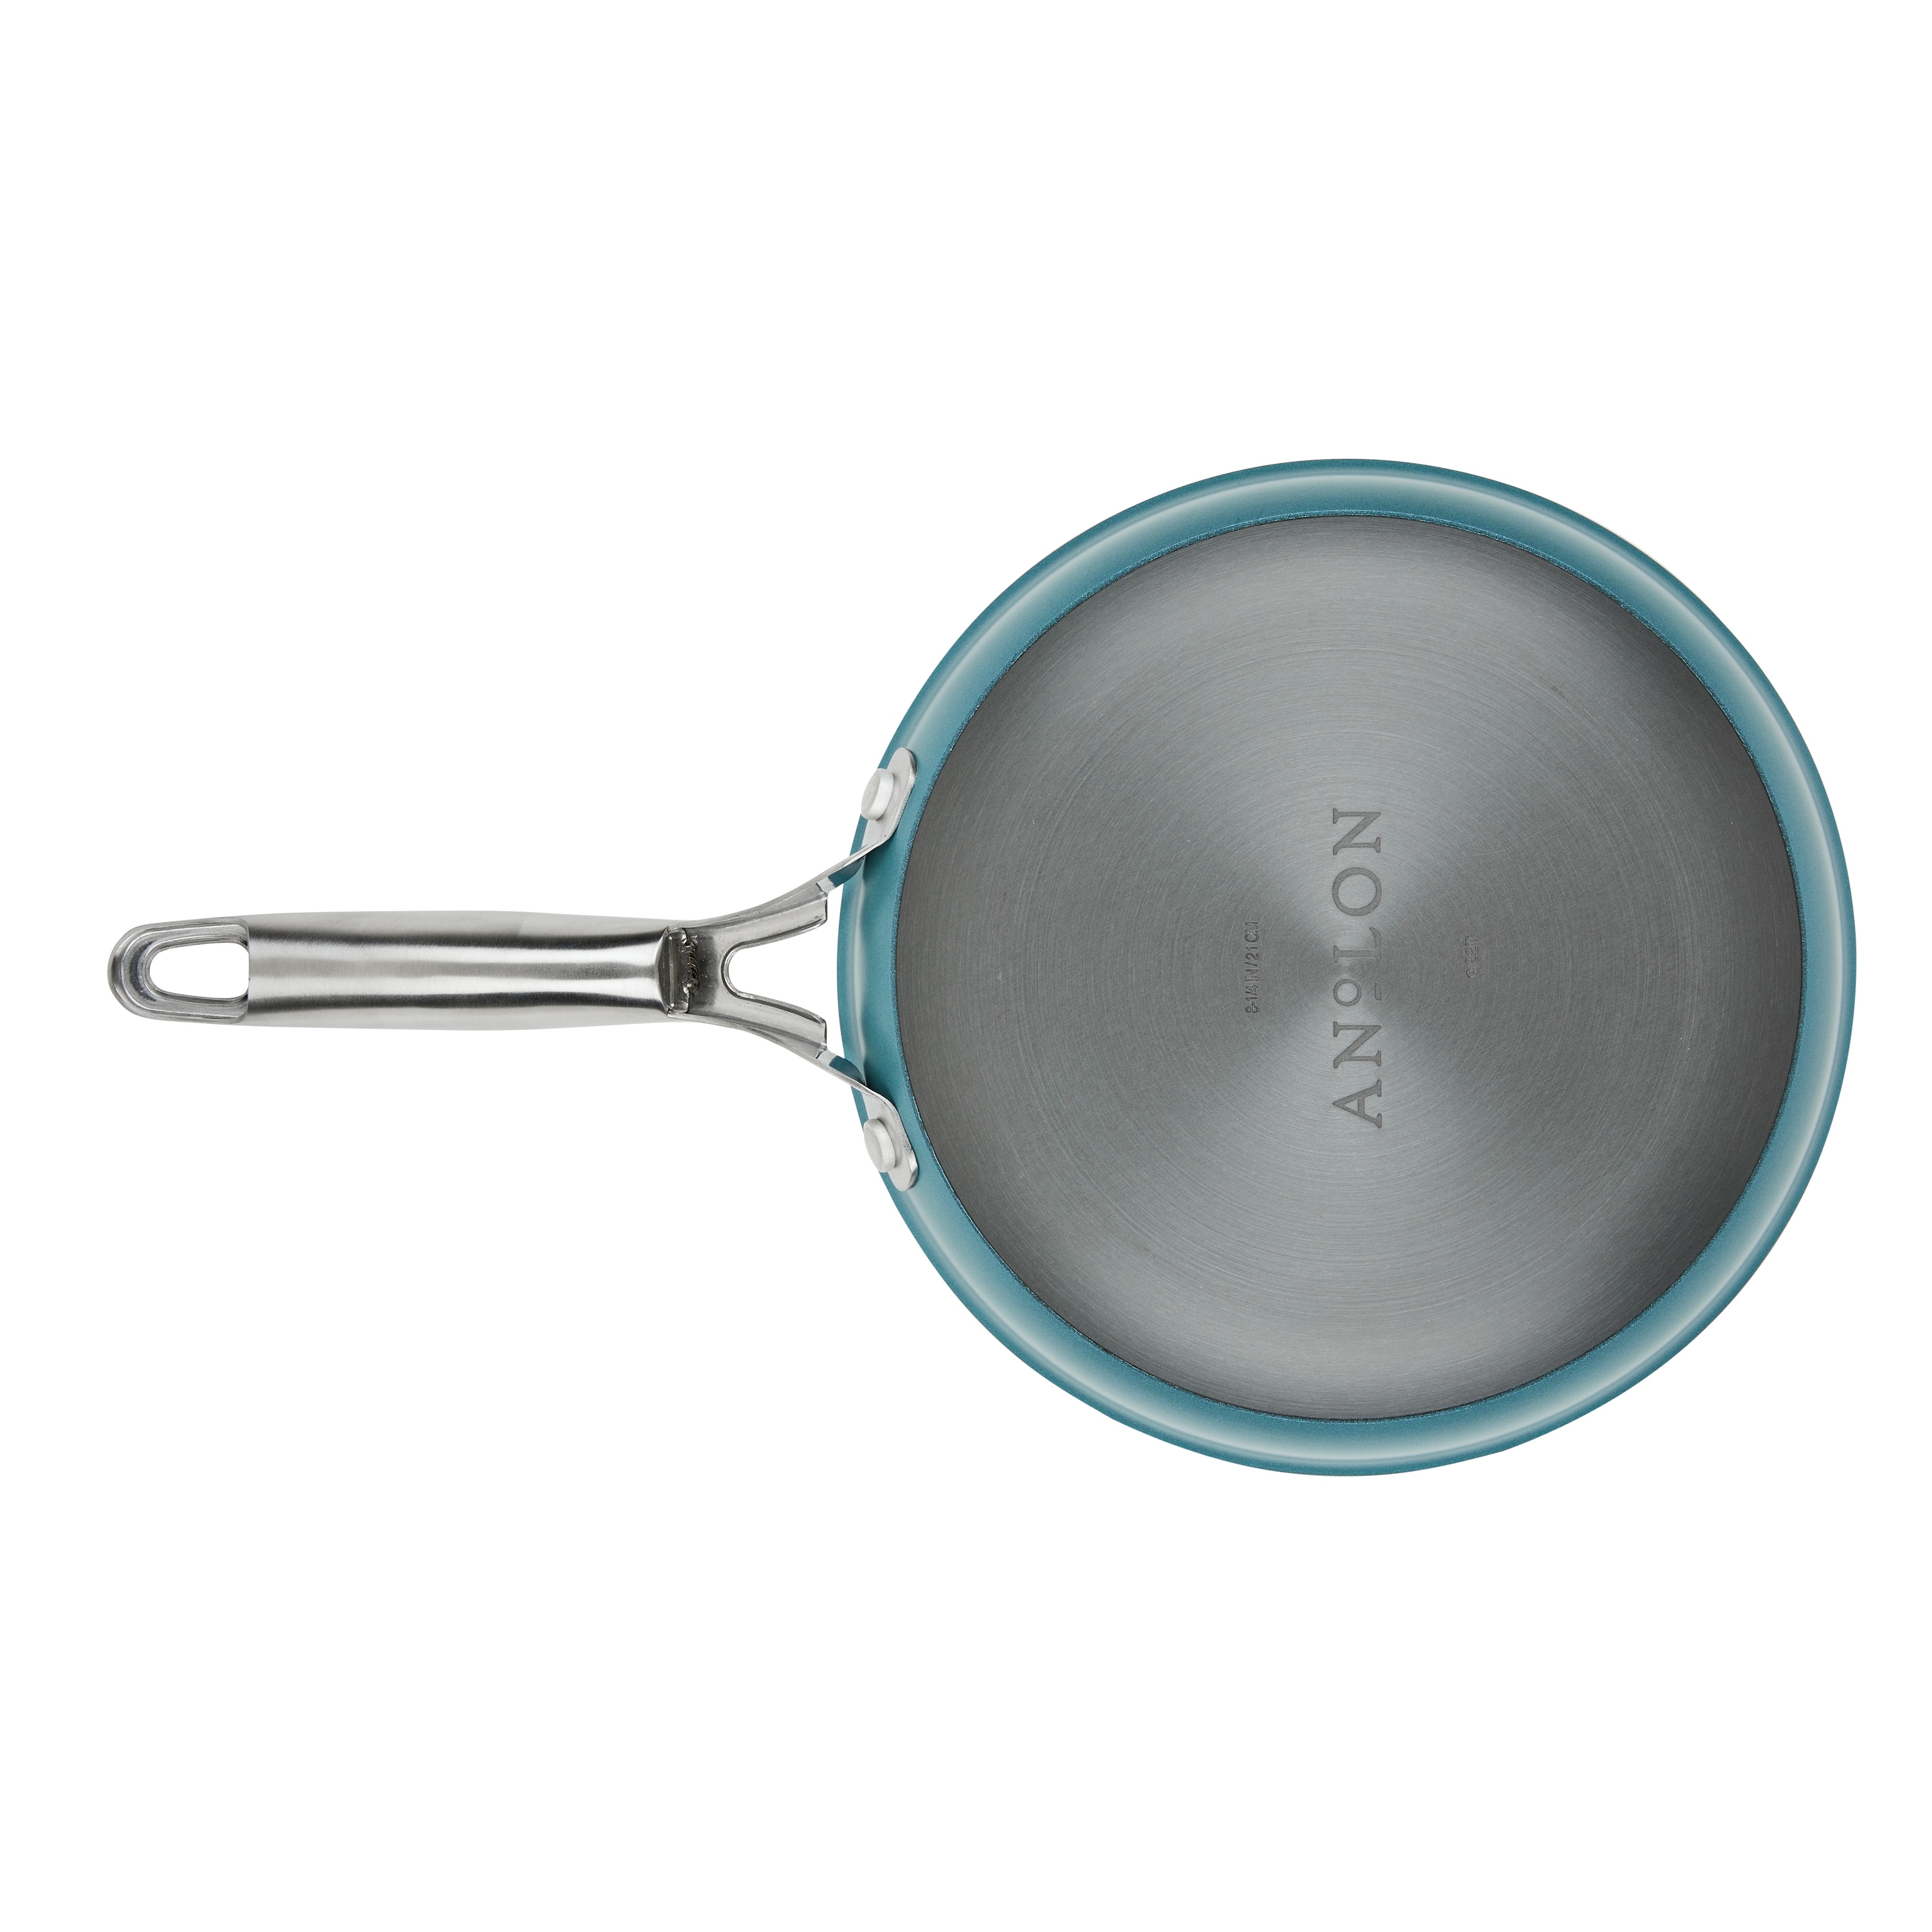 https://ak1.ostkcdn.com/images/products/is/images/direct/20ecbea9d00ff89fdda02d3ddac2e7ed3aad46f4/Anolon-Achieve-Hard-Anodized-Nonstick-Frying-Pan%2C-12-Inch.jpg